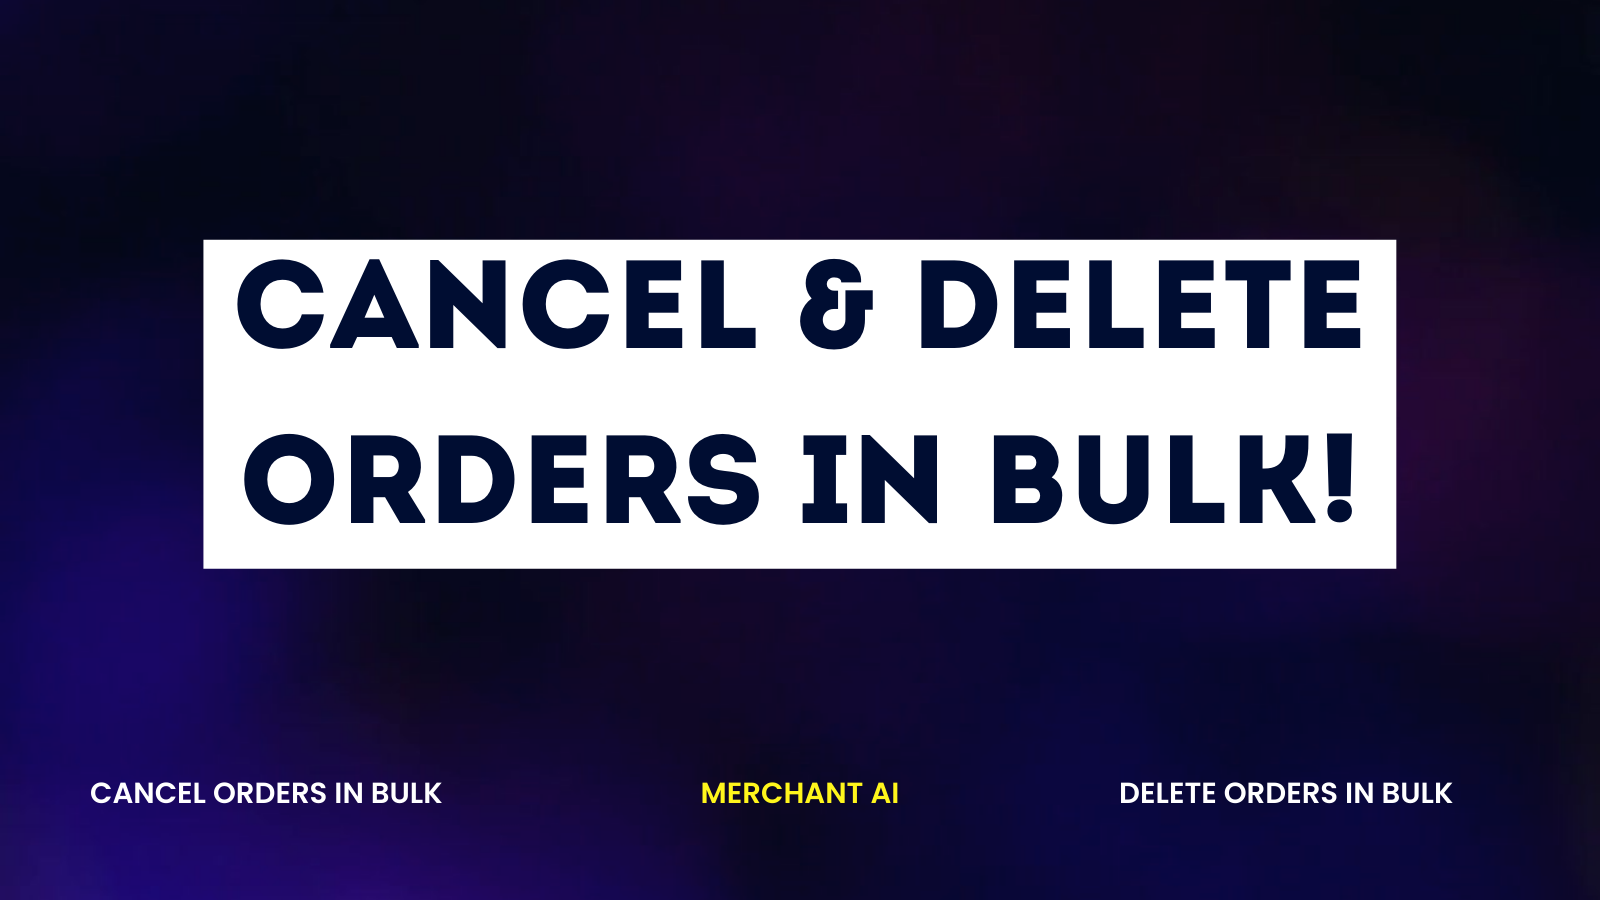 Cancel and delete orders in bulk